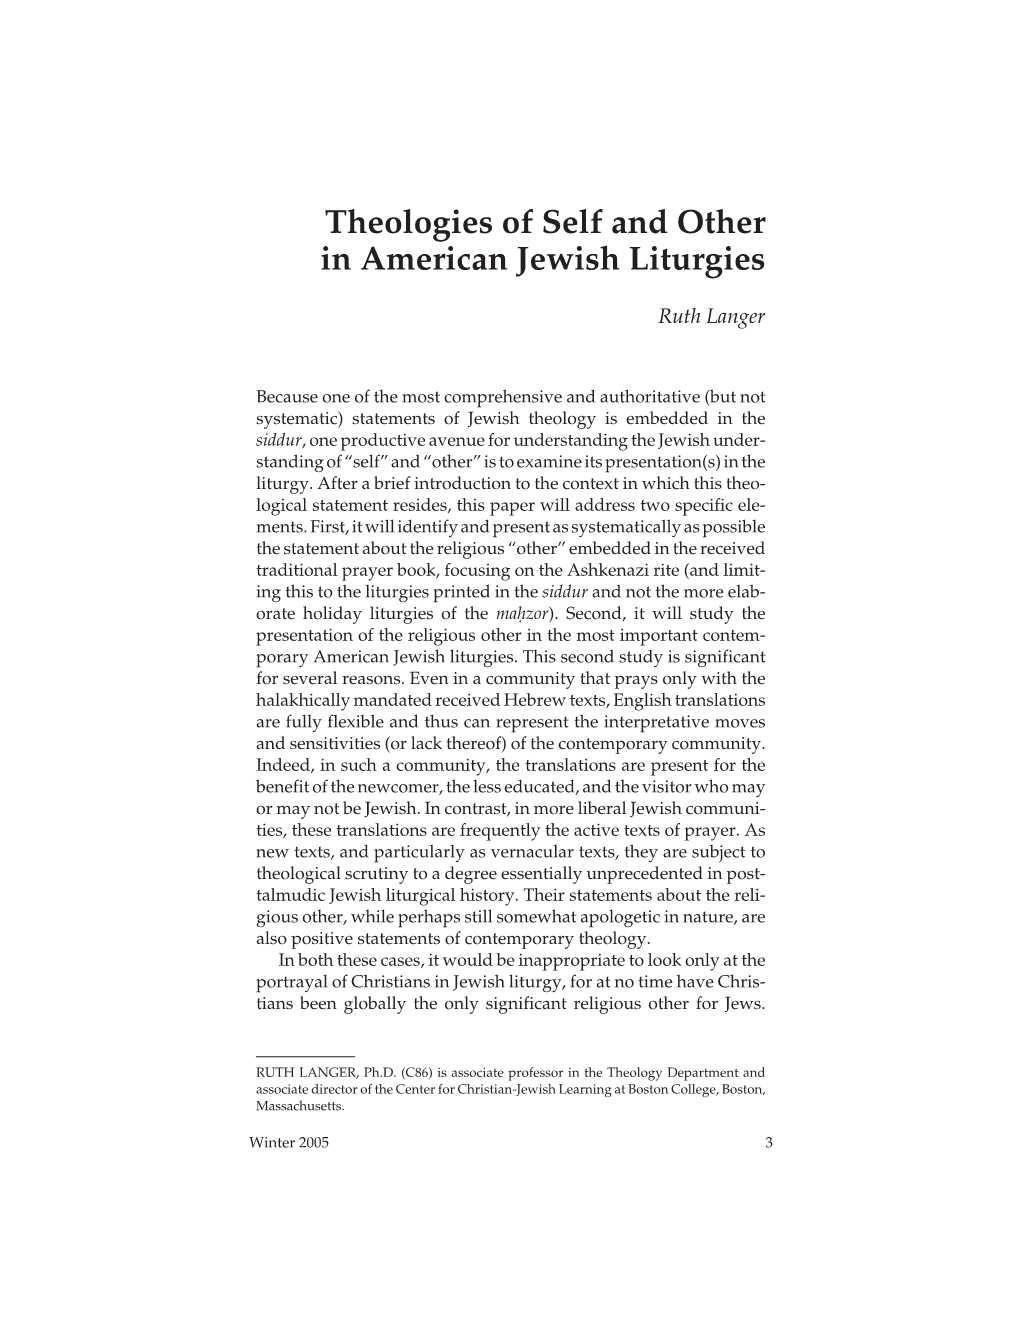 Theologies of Self and Other in American Jewish Liturgies